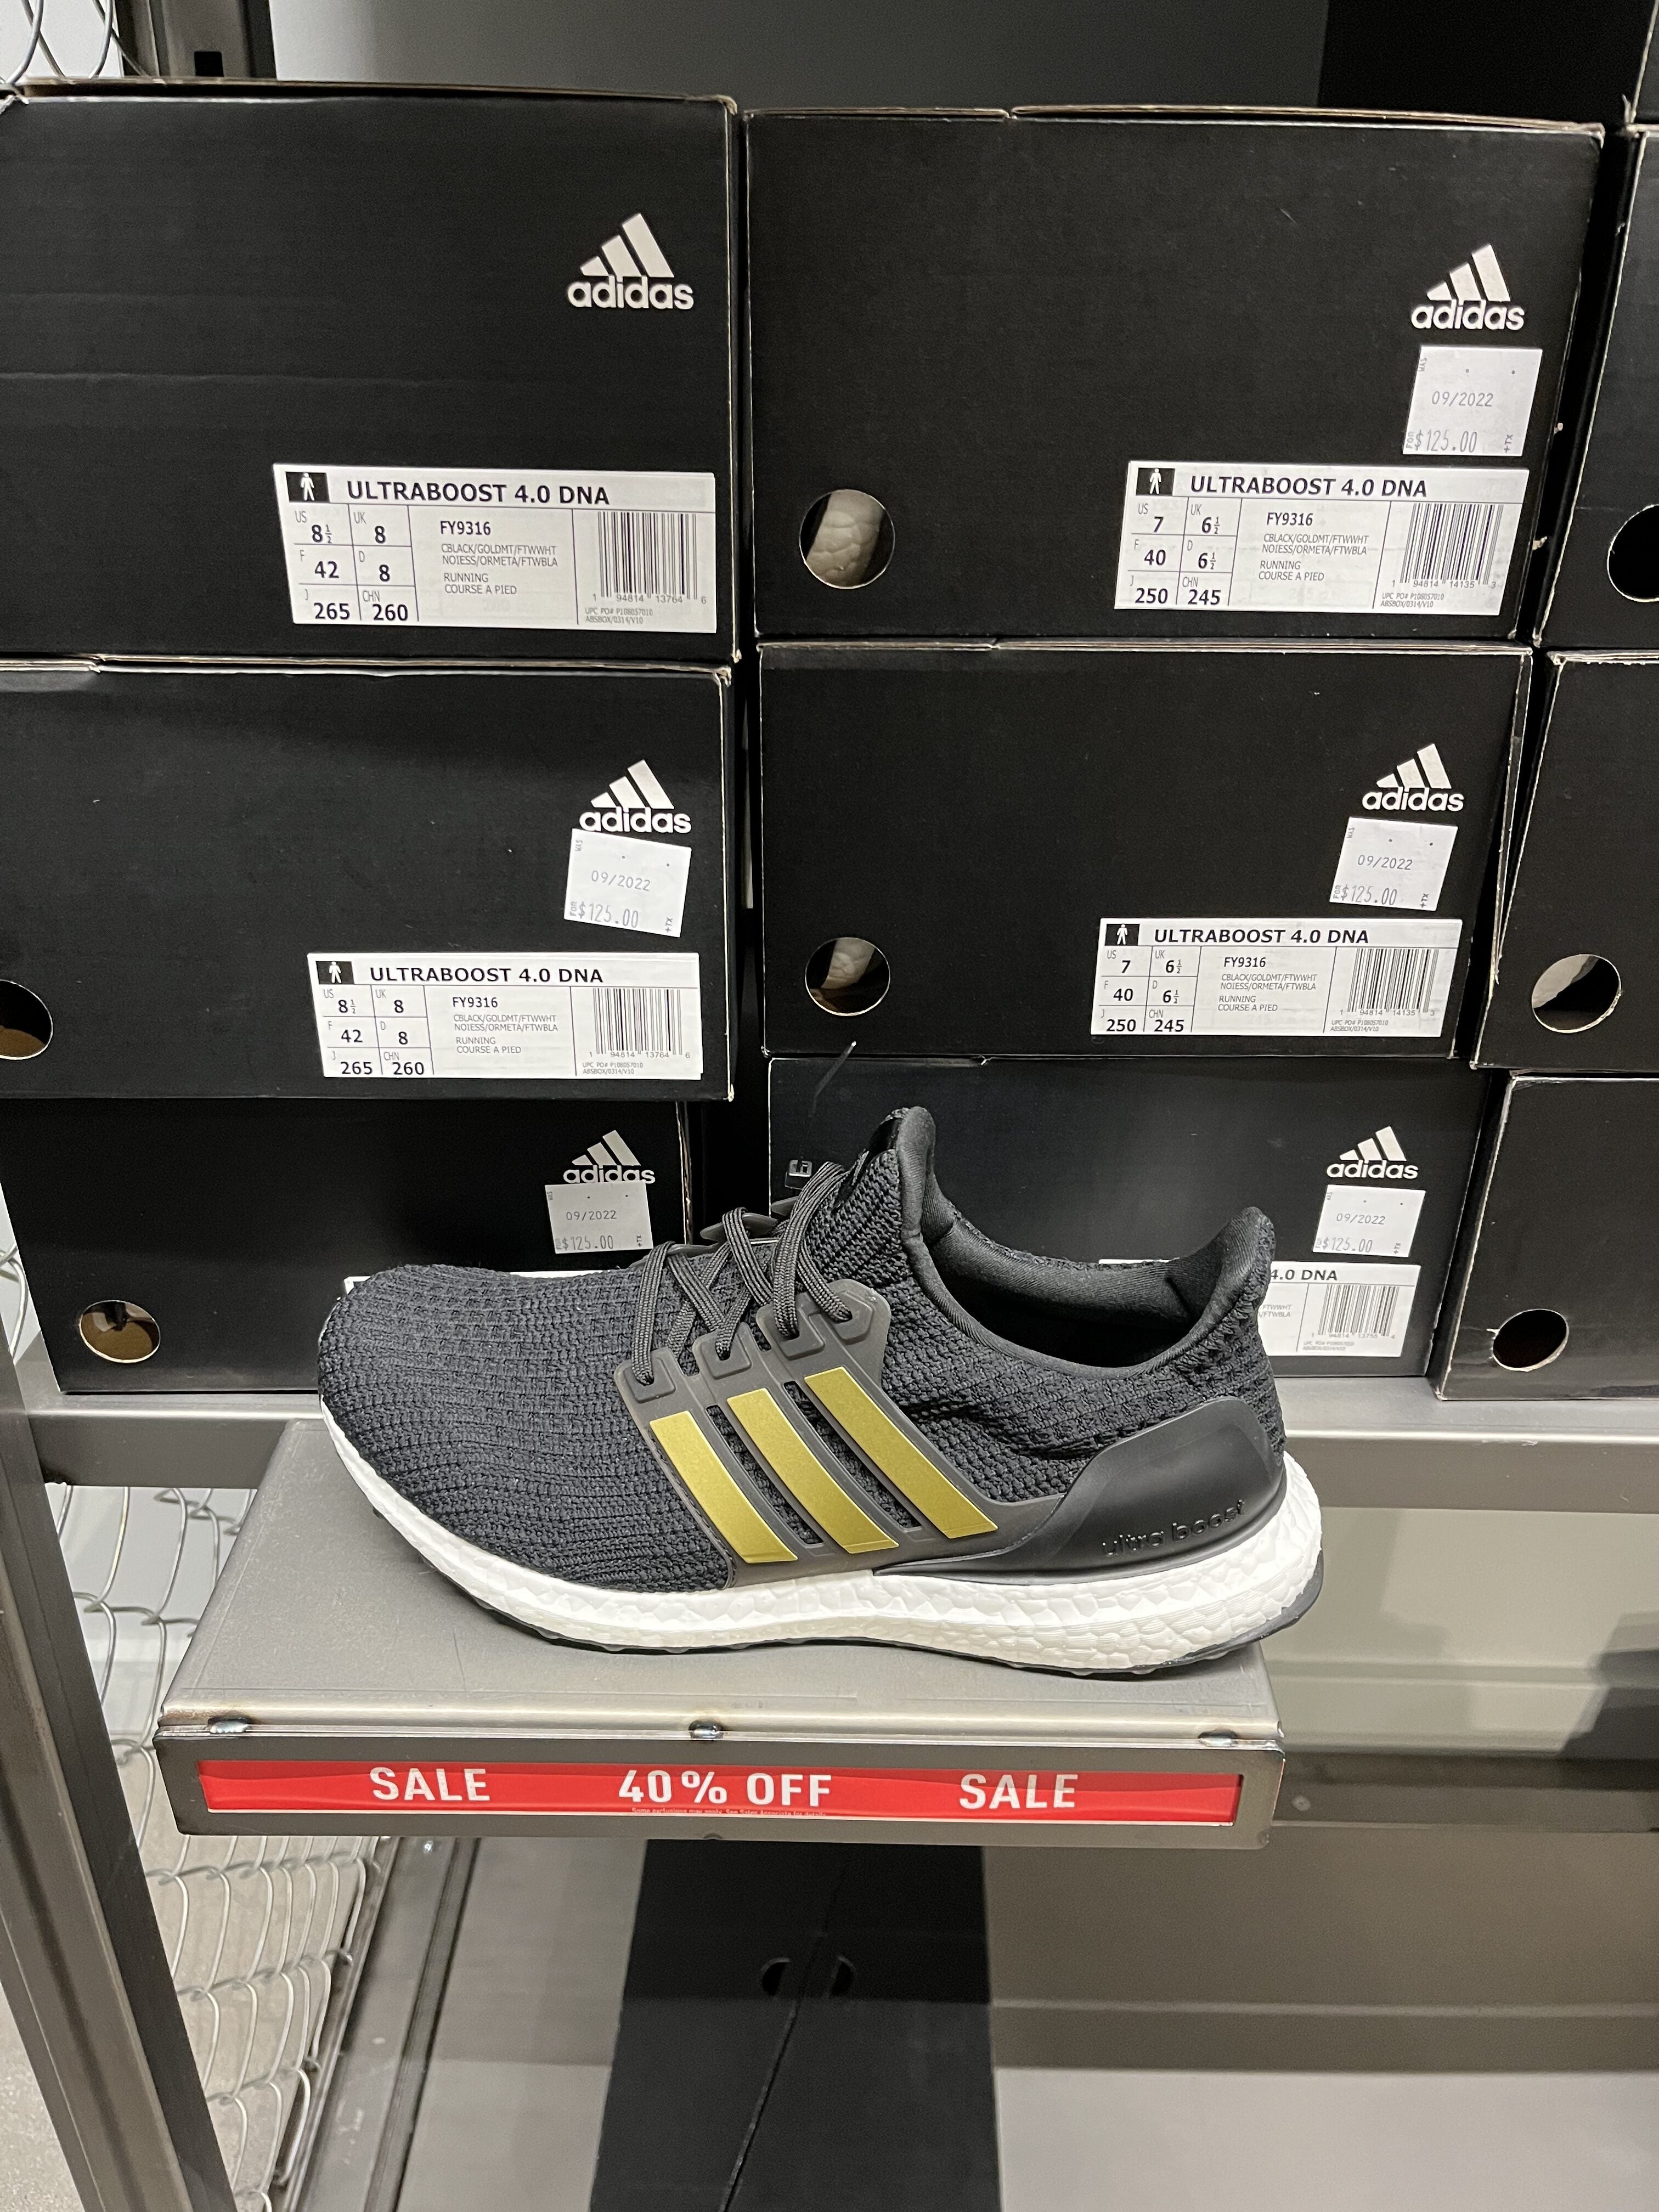 adidas] Adidas Outlet (Heartland Mississauga) - off including past season Ultraboosts -> $75) - RedFlagDeals.com Forums